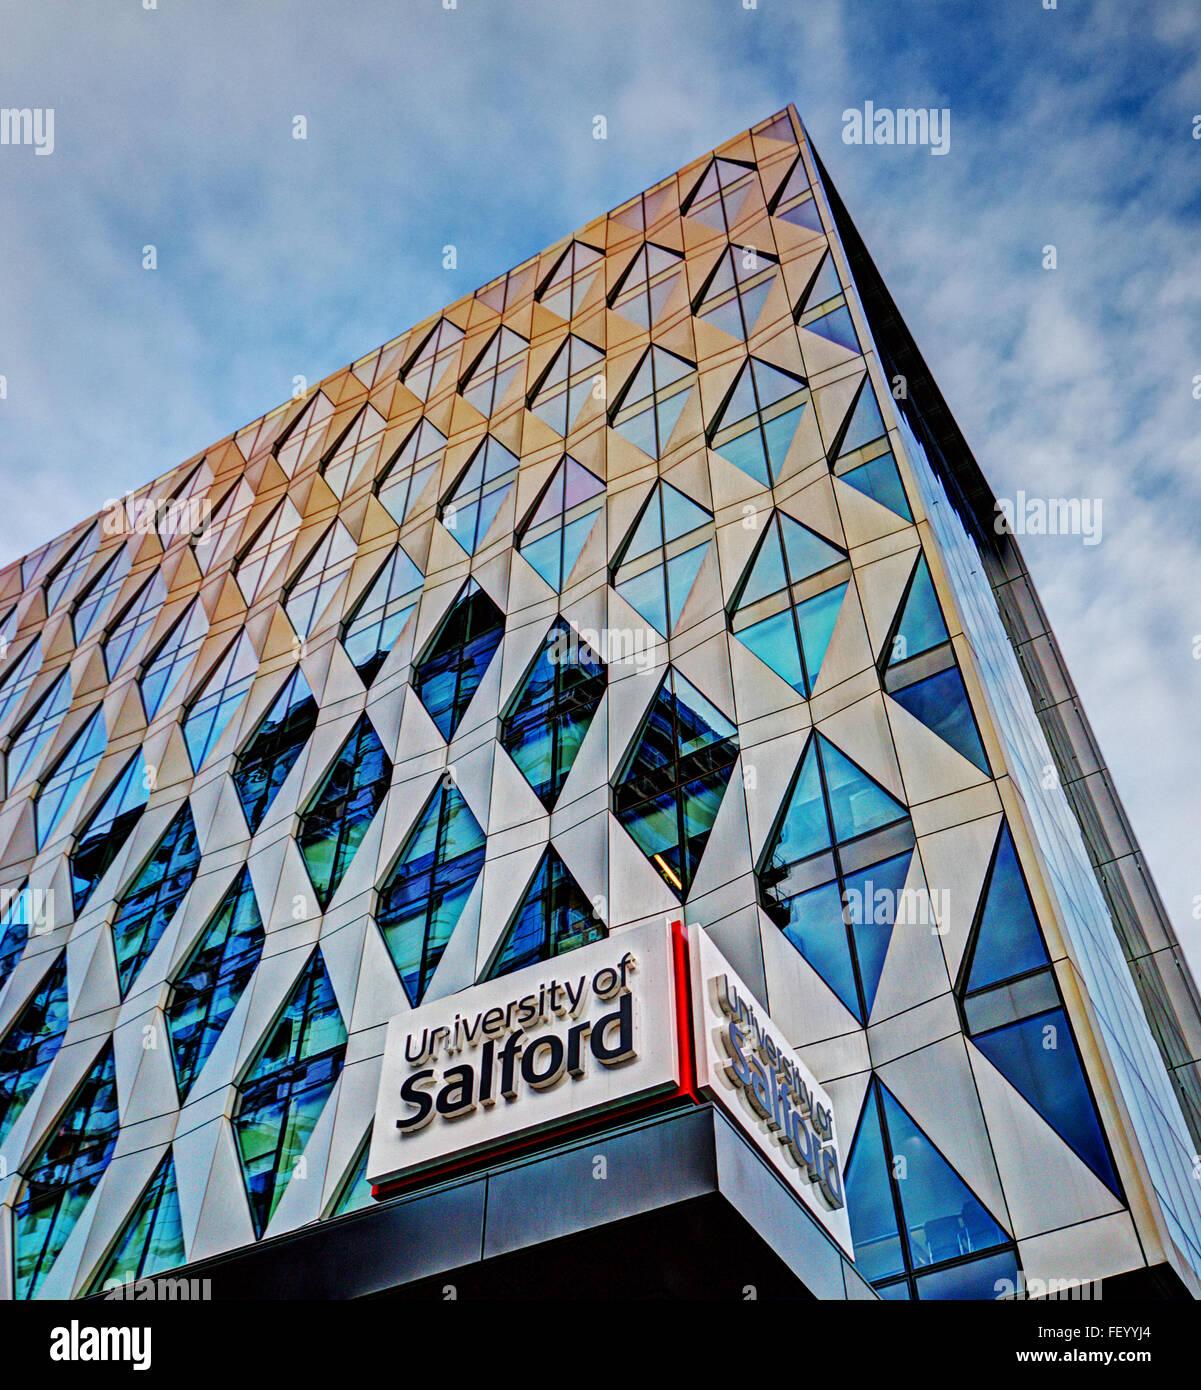 Salford University building at Salford Quays, Manchester Stock Photo